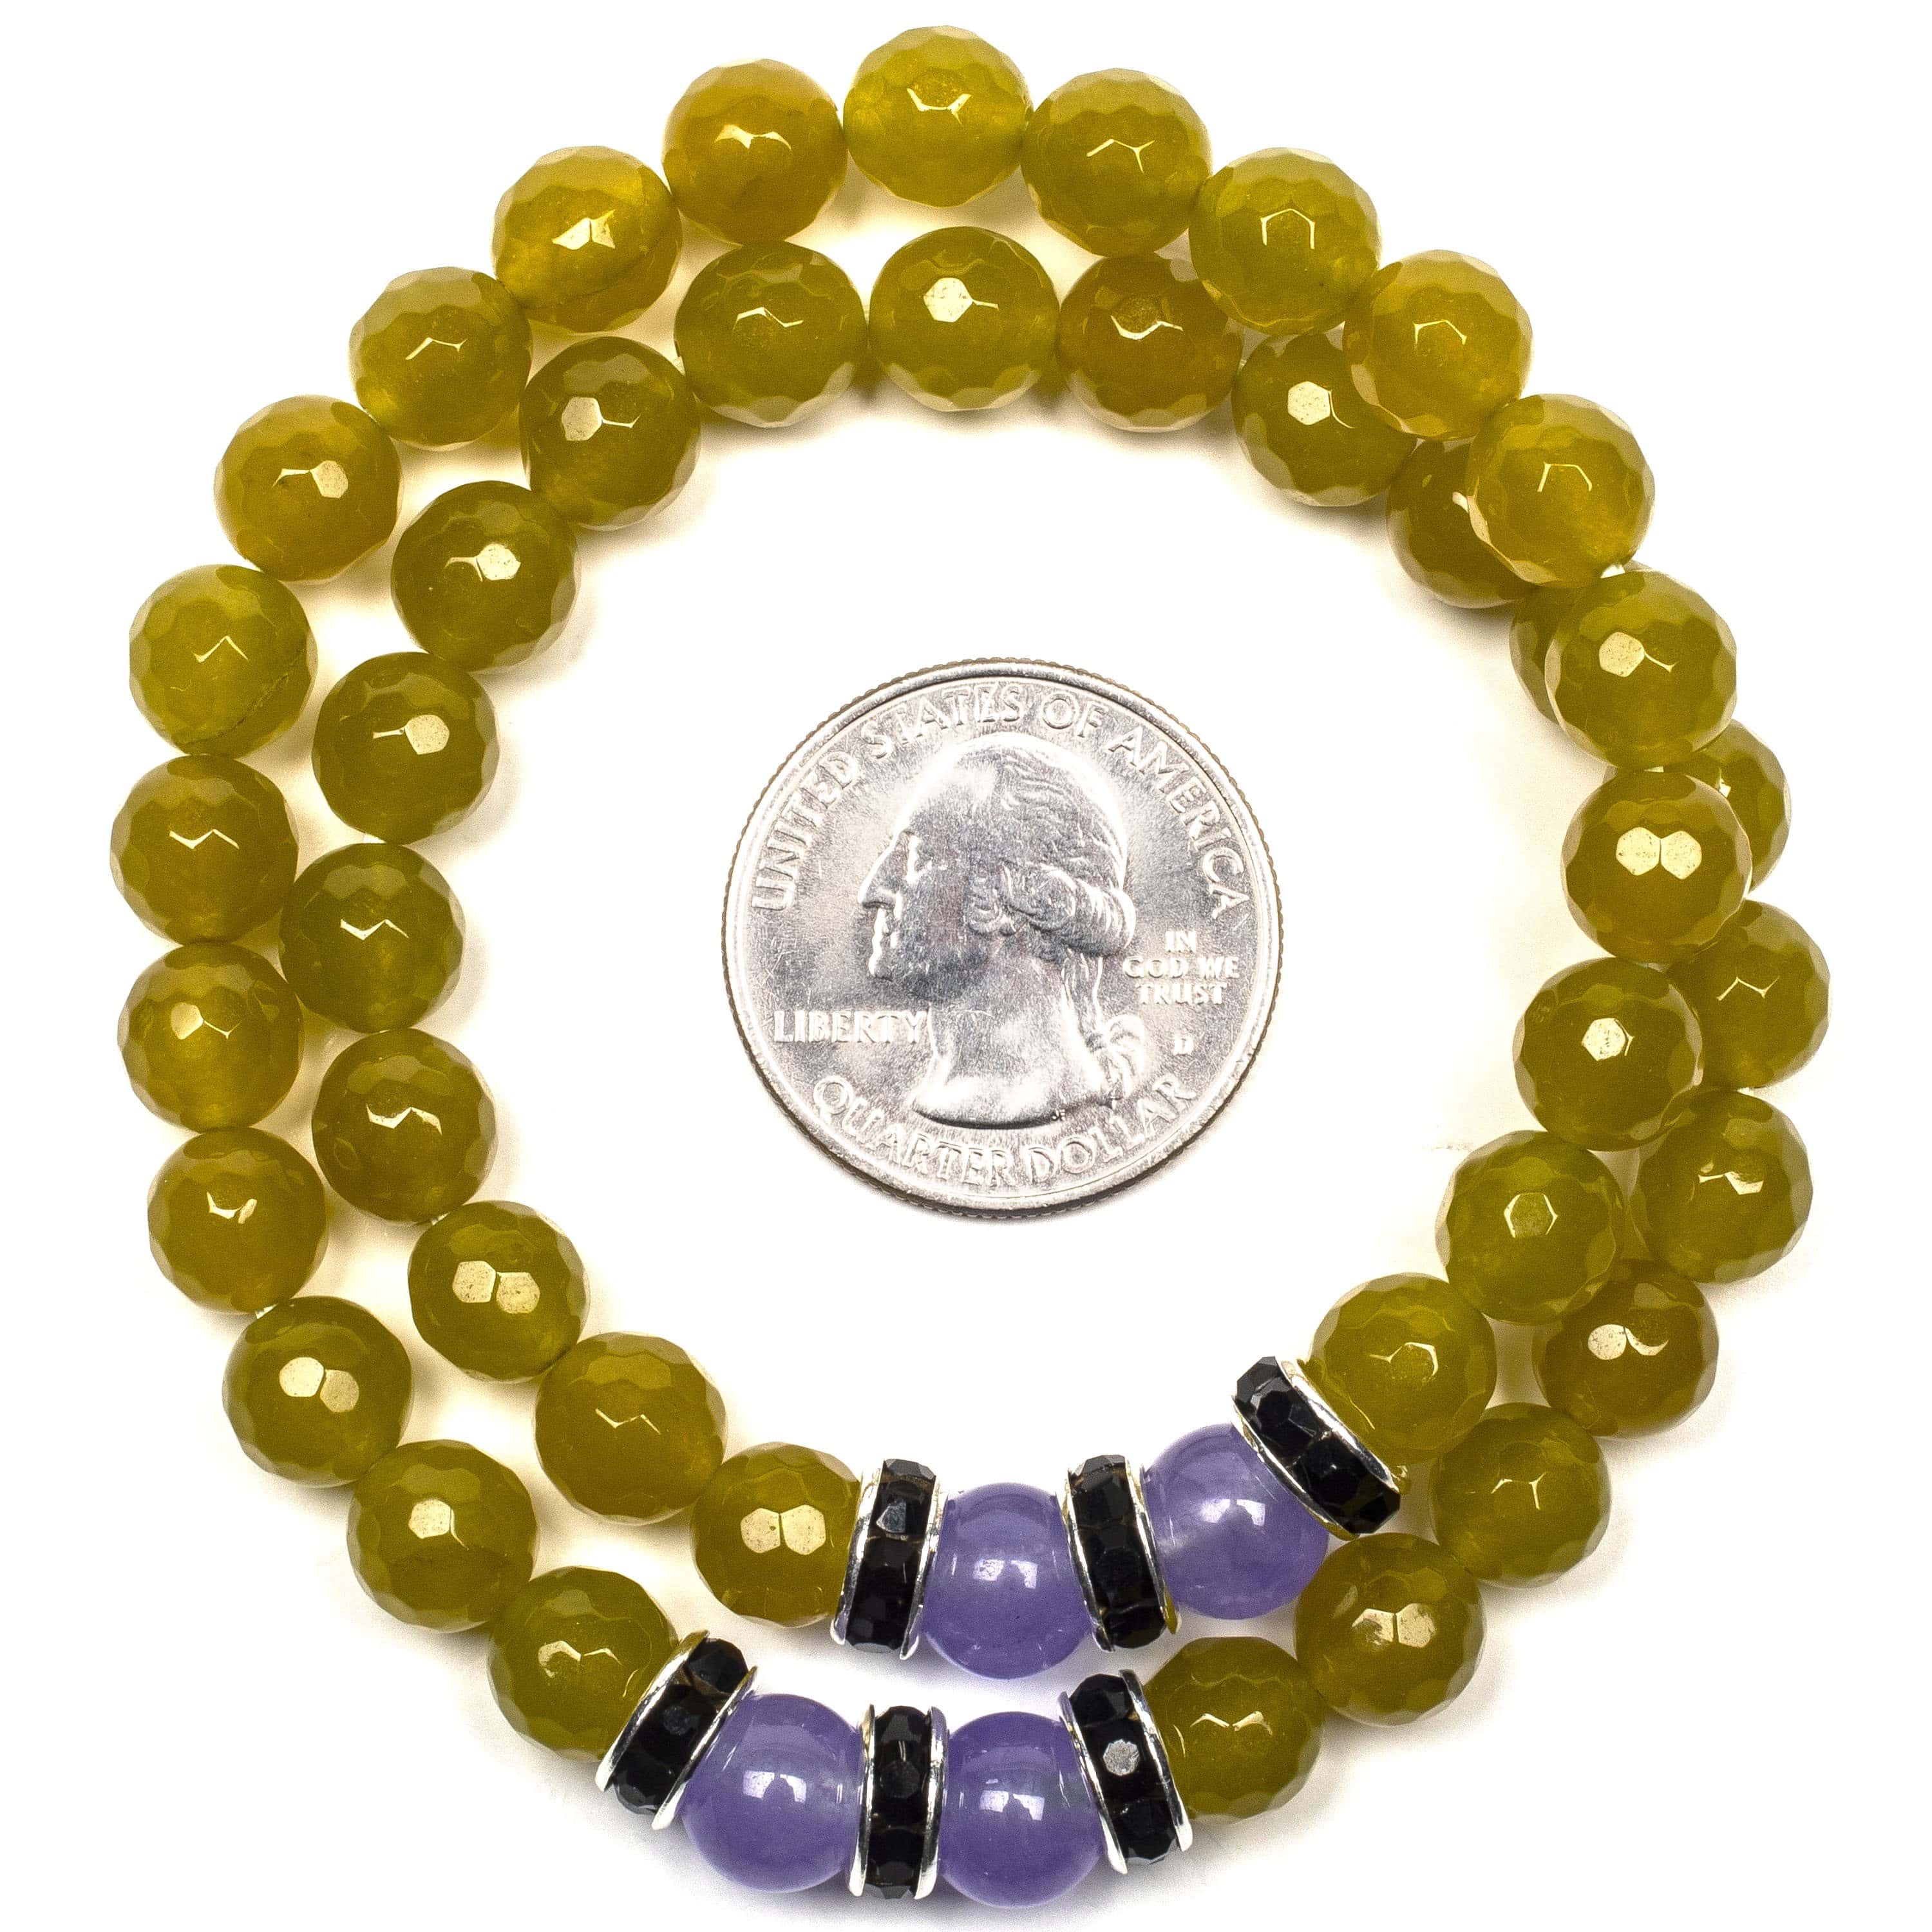 Kalifano Gemstone Bracelets Faceted Green Agate 8mm Beads with Purple  Agate and Black and Silver Accent Beads Double Wrap Elastic Gemstone Bracelet WHITE-BGI2-026